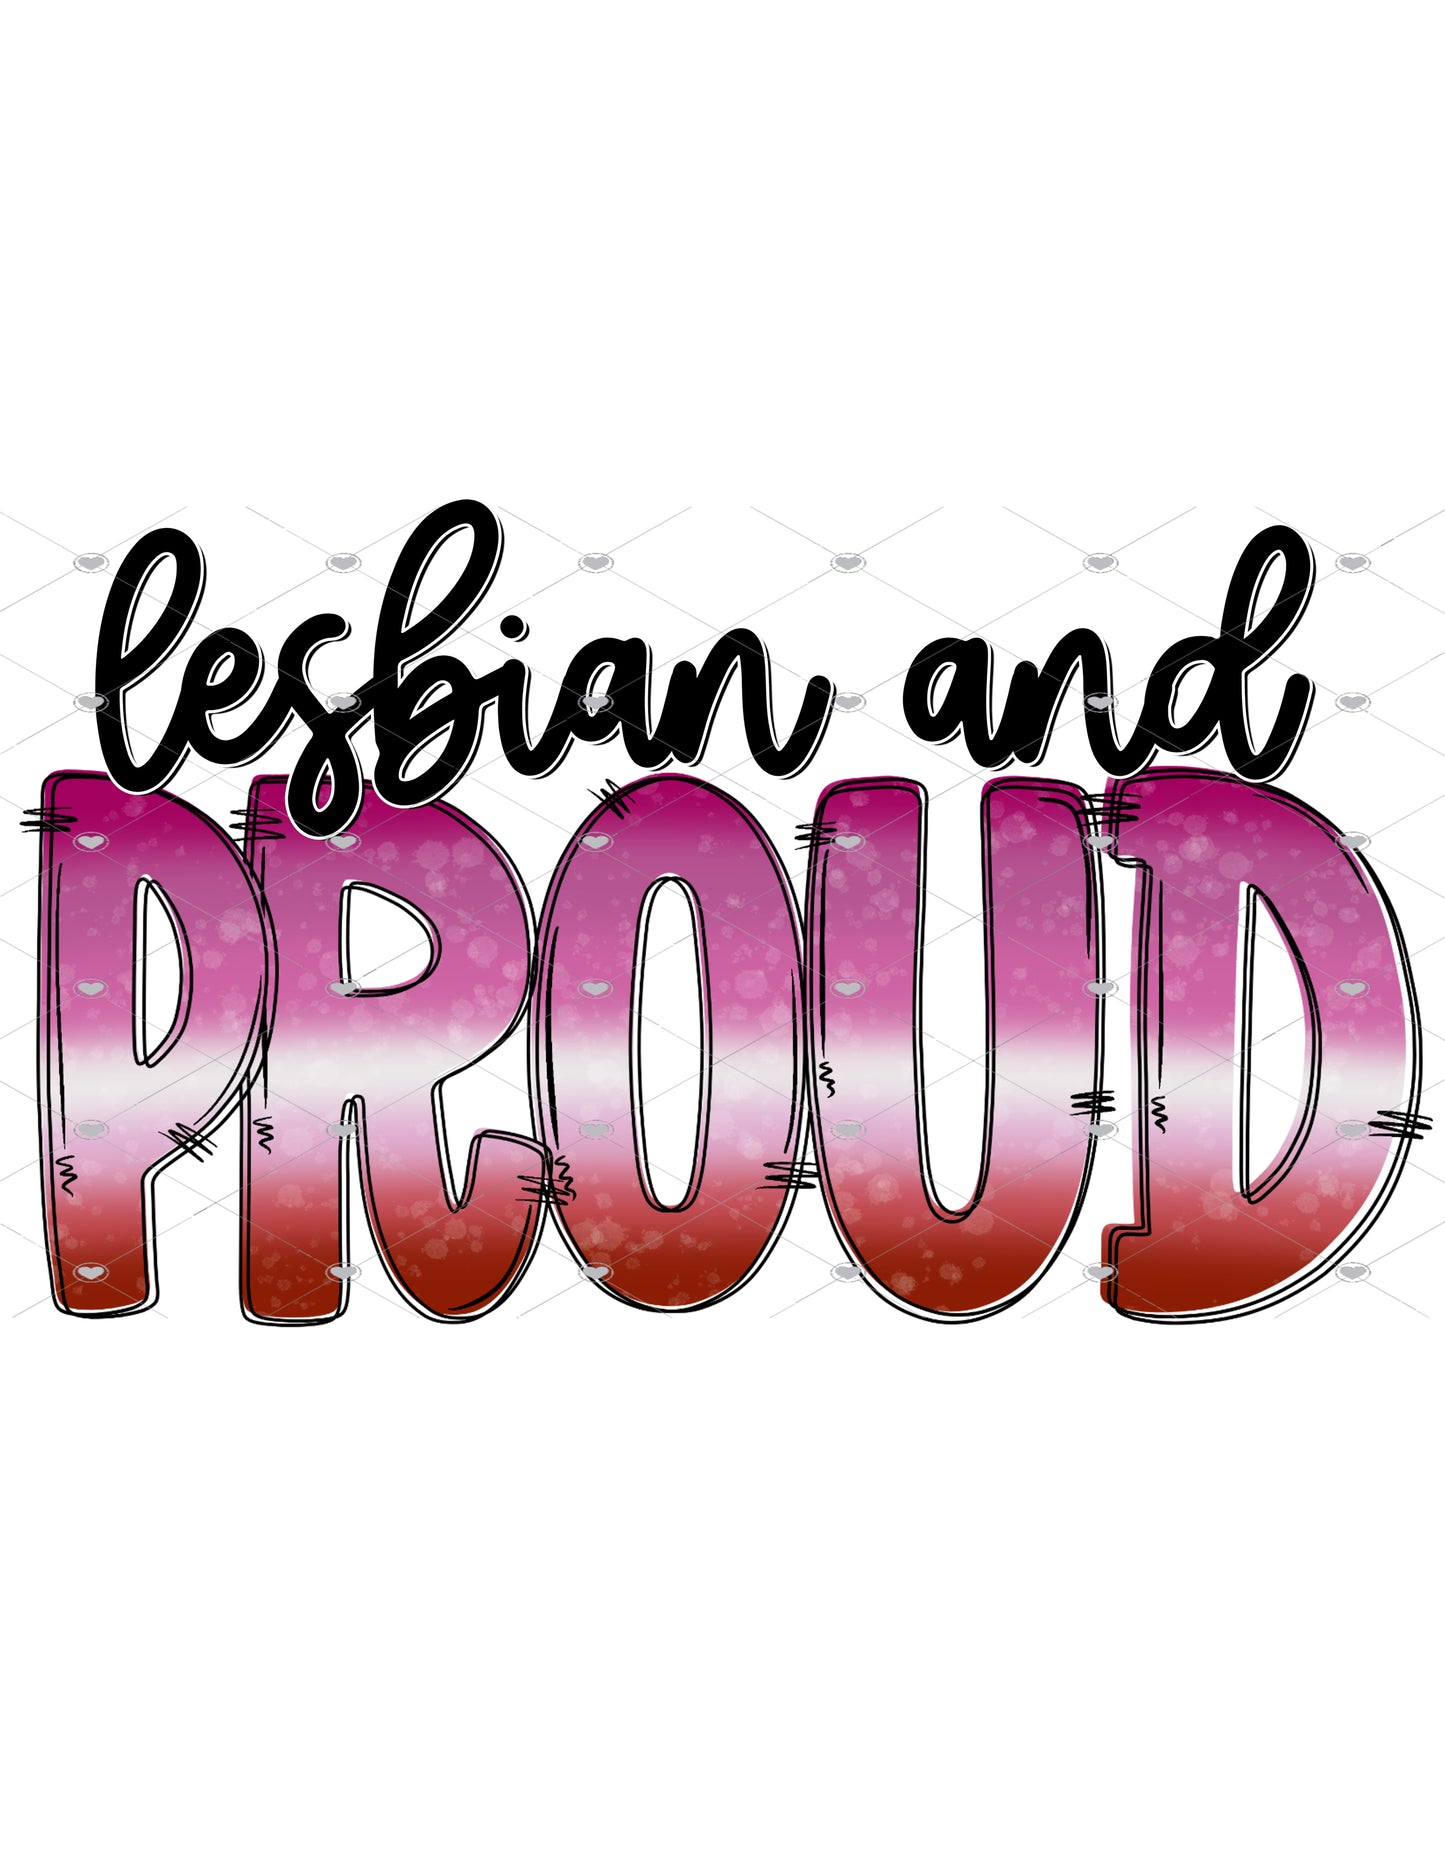 Lesbian and Proud Ready To Press Sublimation Transfer